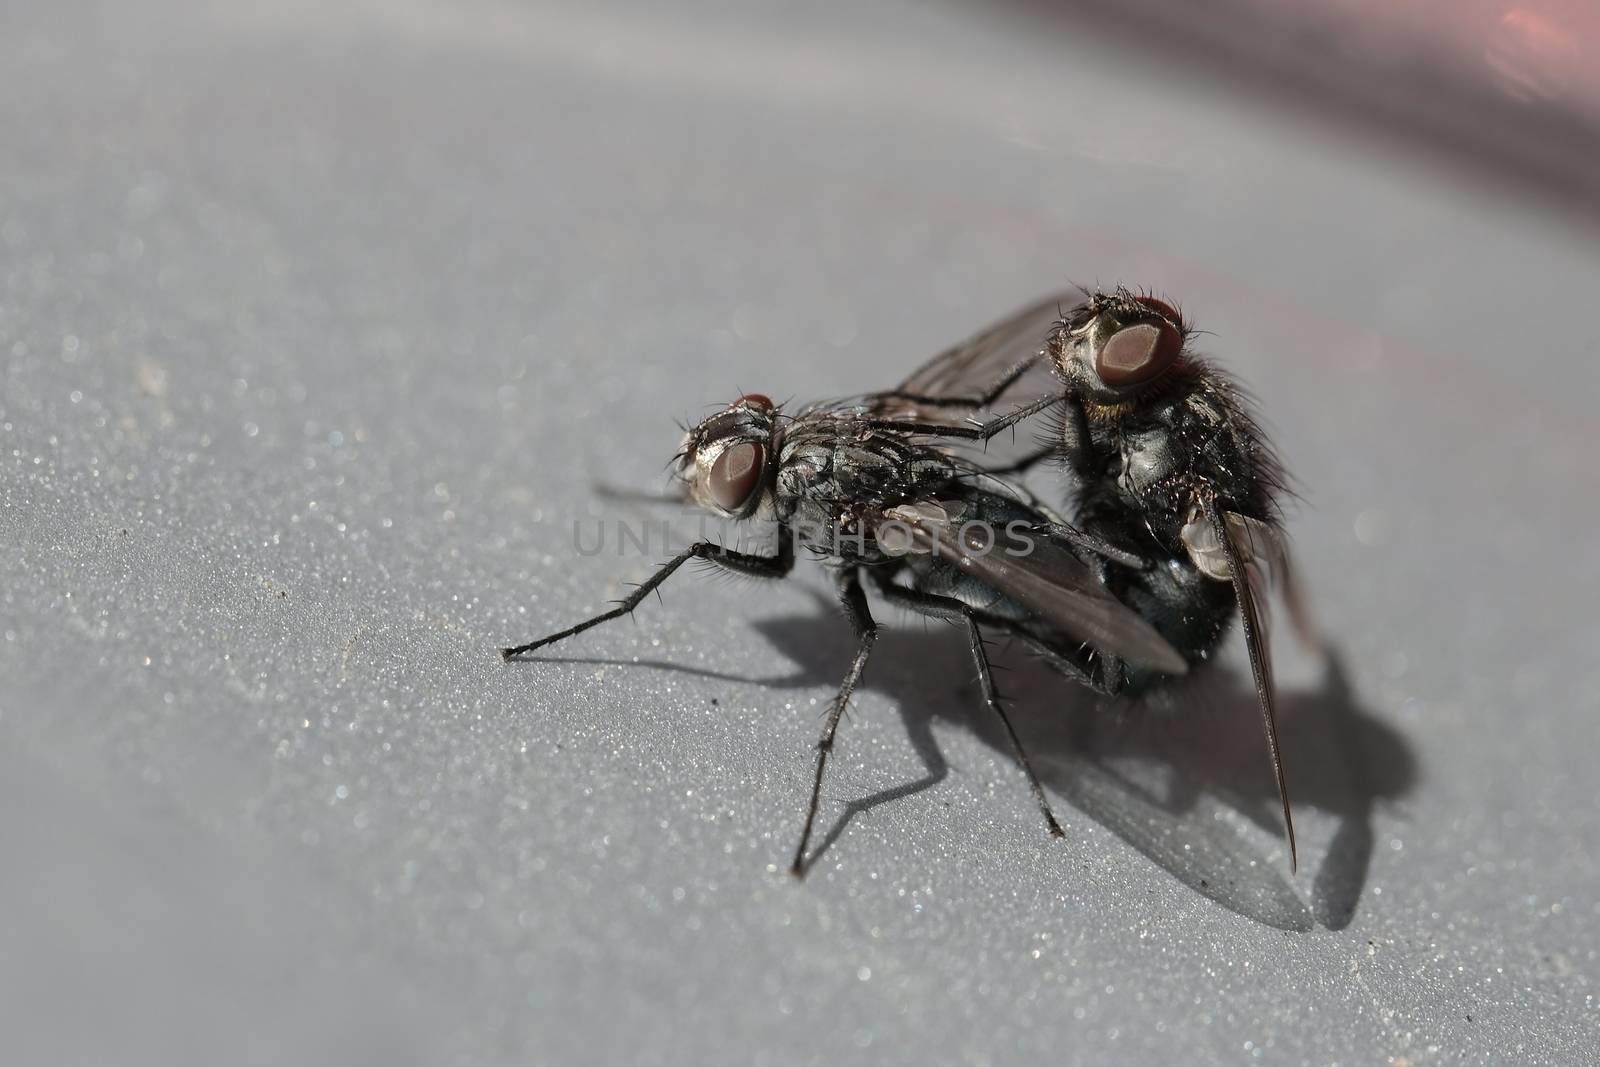 Flies mating on a shiny surface